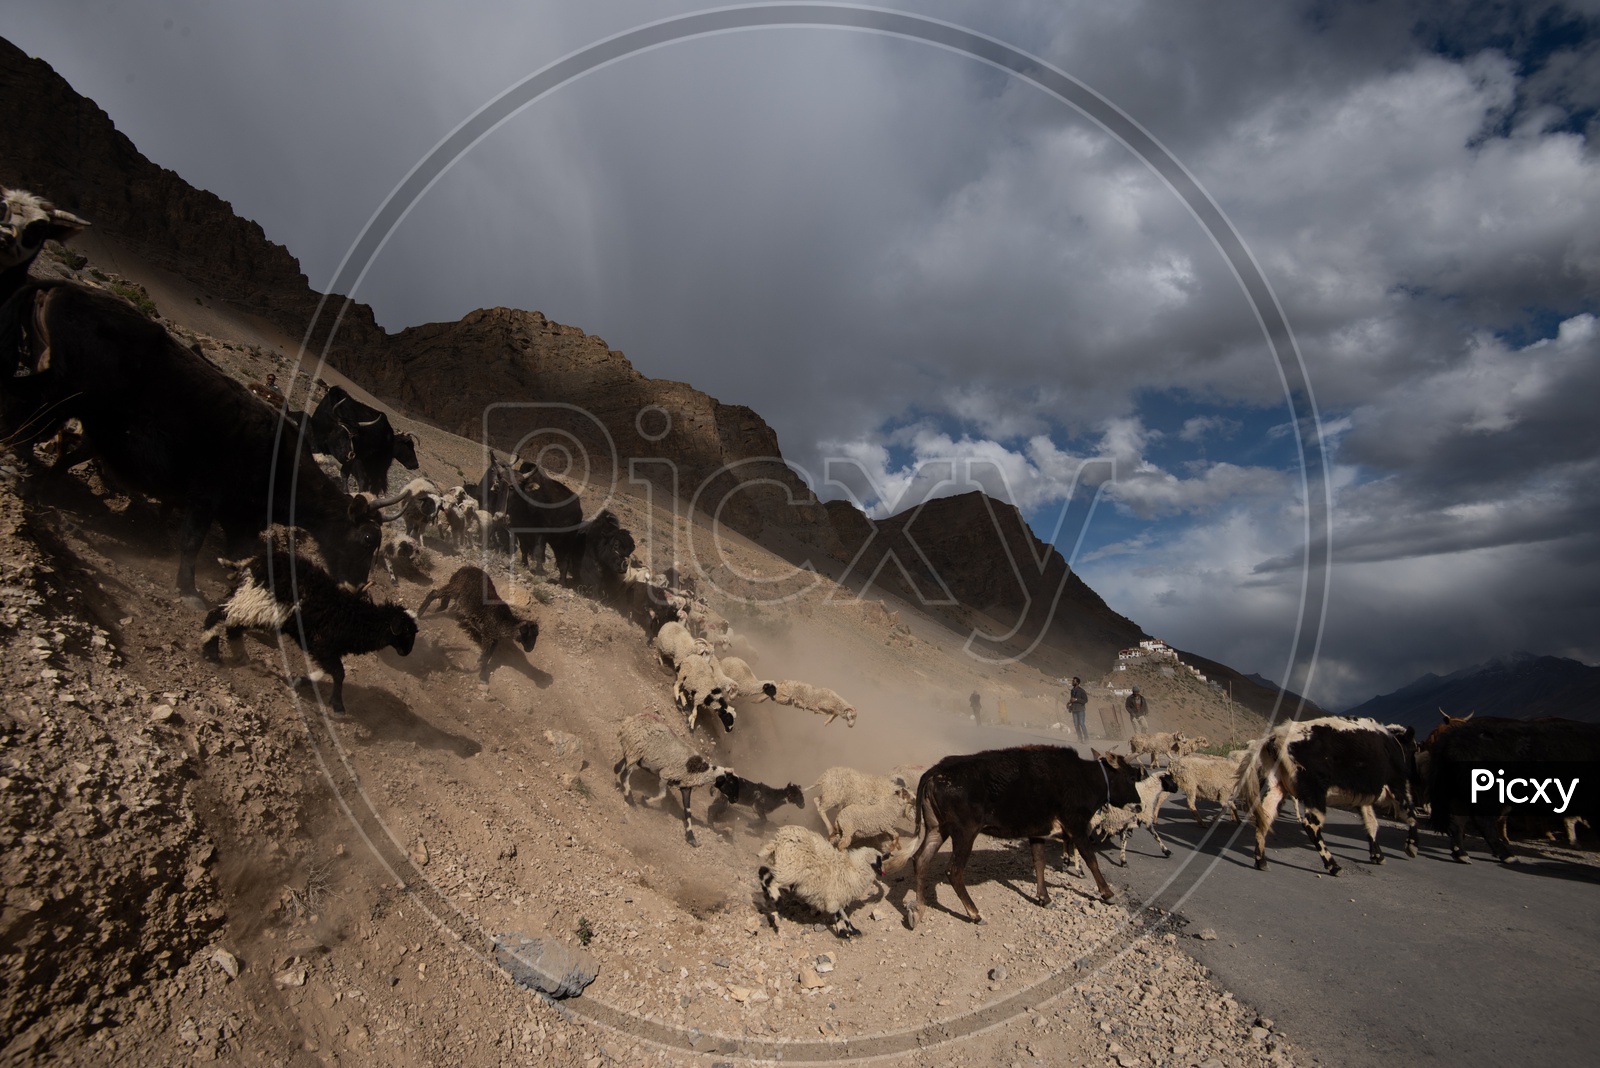 Bisons in Dunes of Leh or Ladakh with sky as a Background